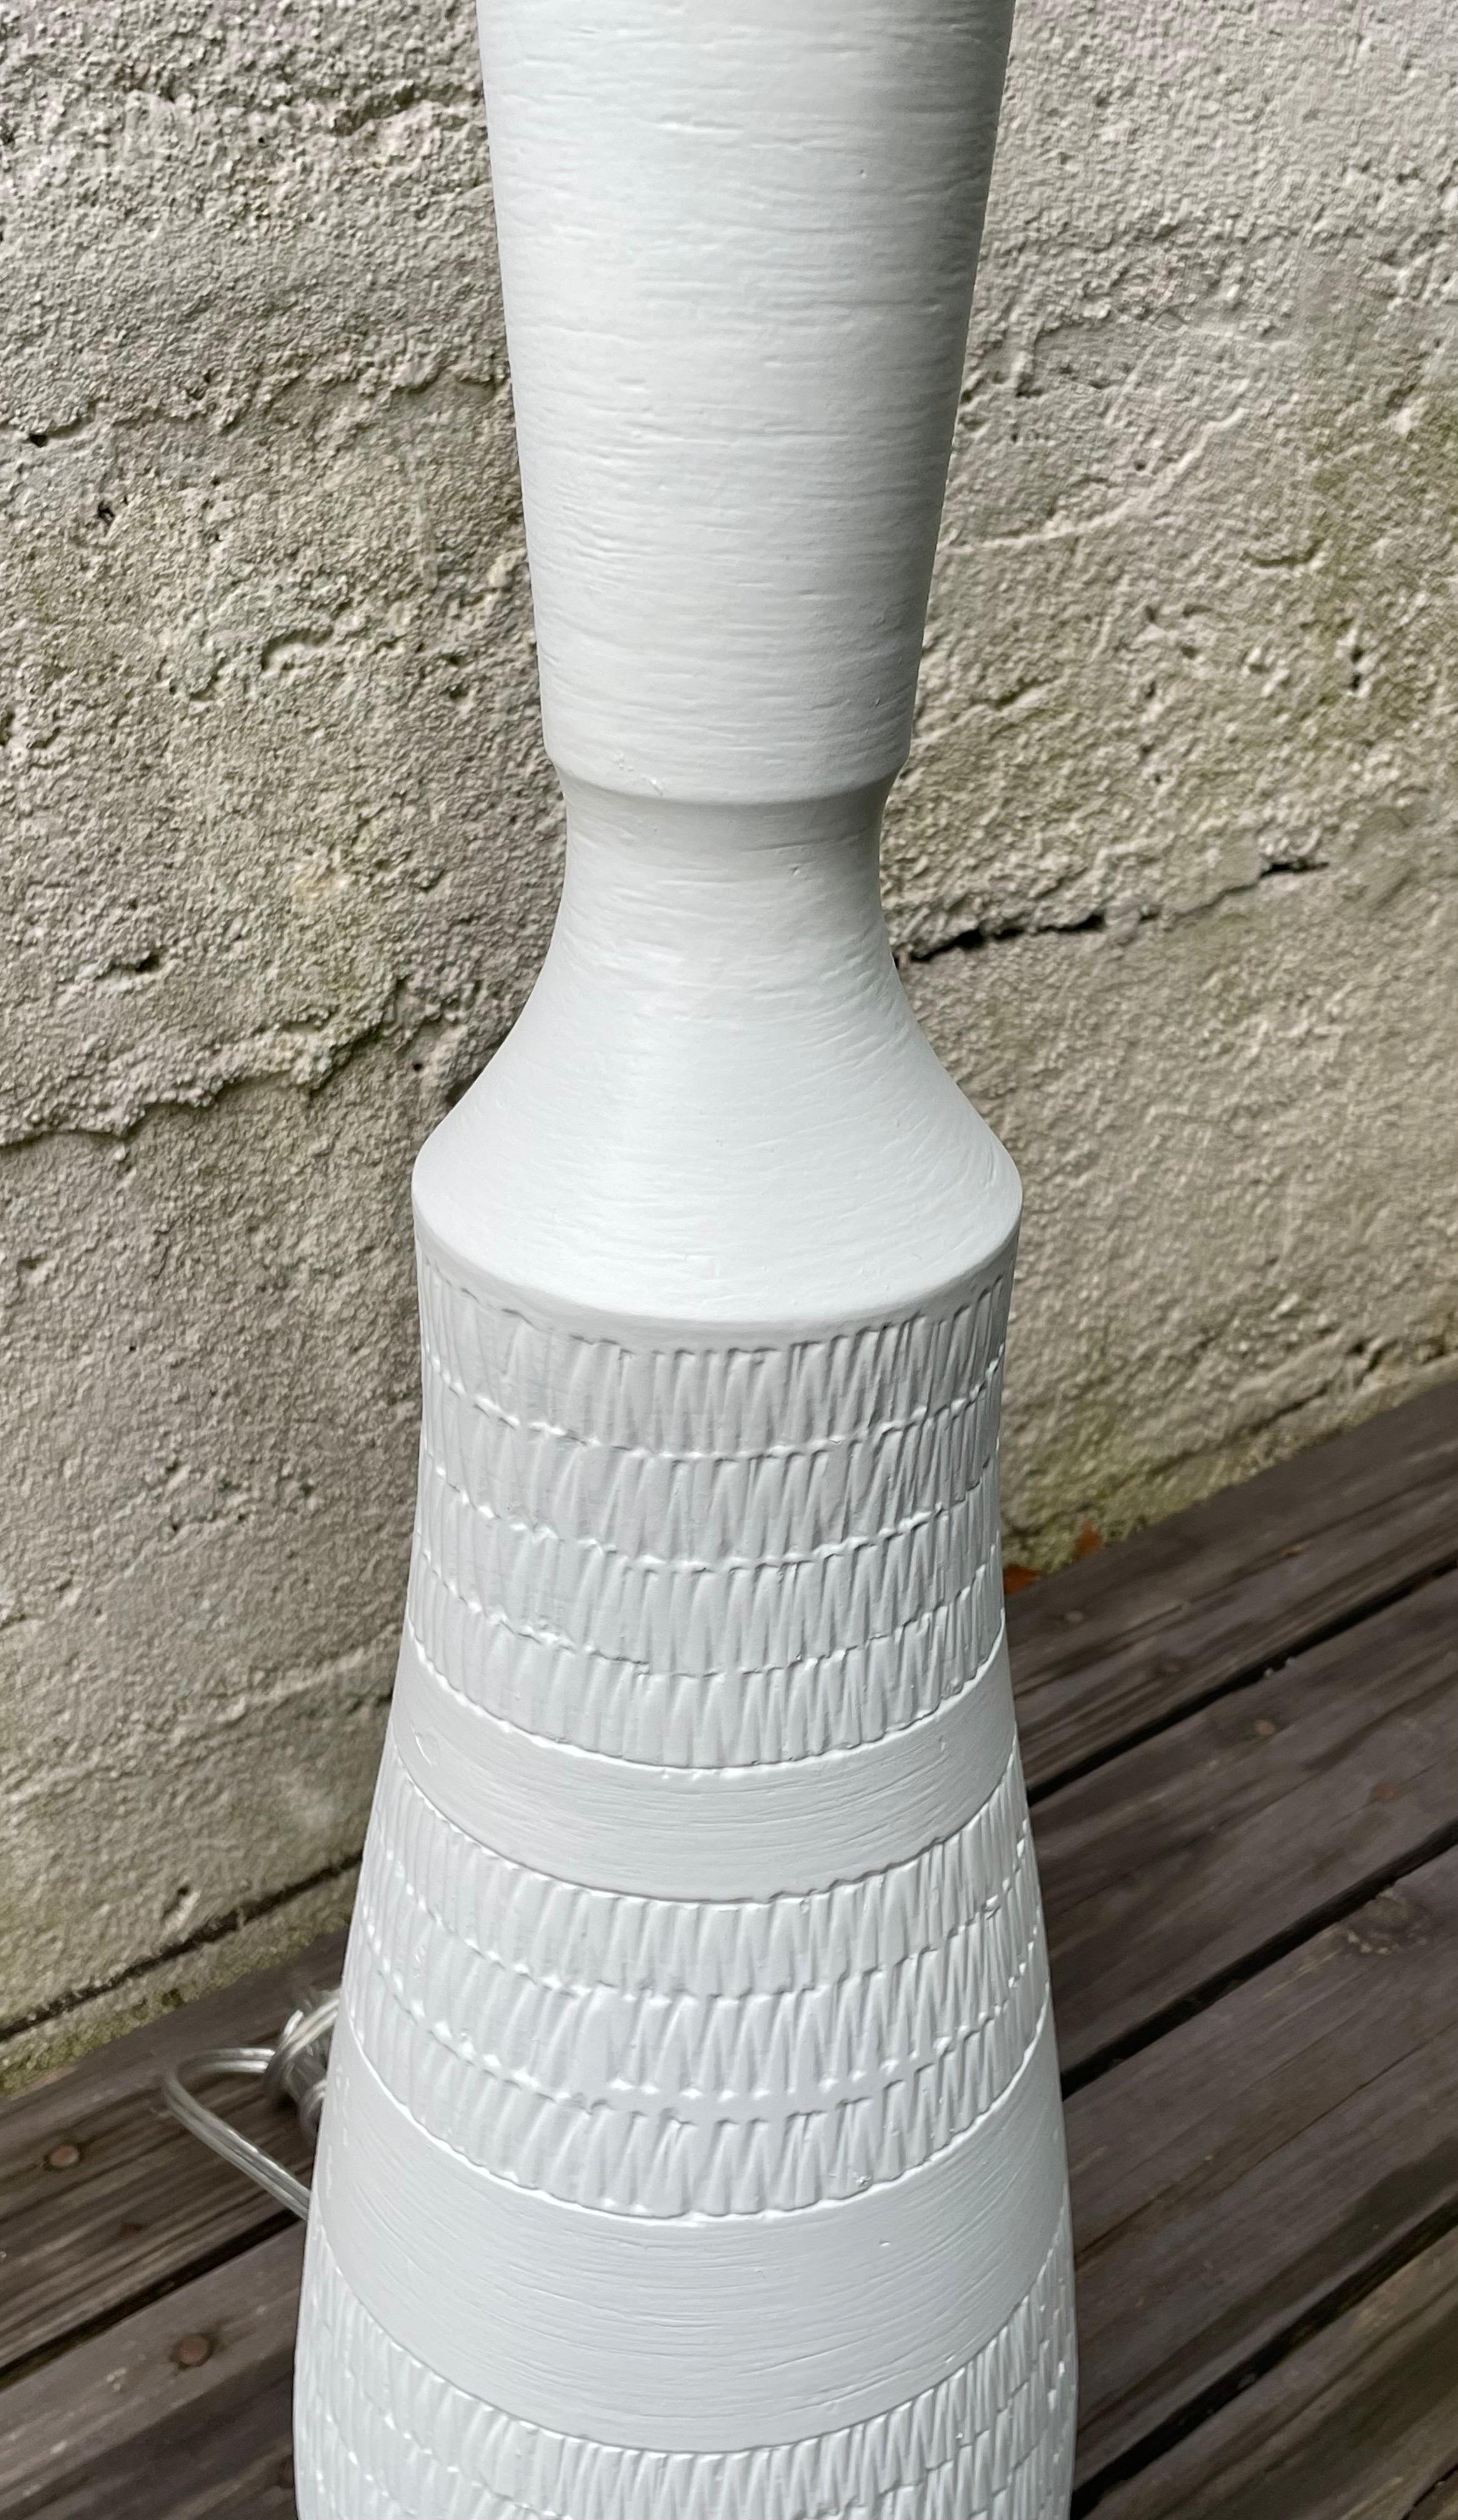 American Mid Century Modern Table Lamp in Matte White, Large Scale, 1960's For Sale